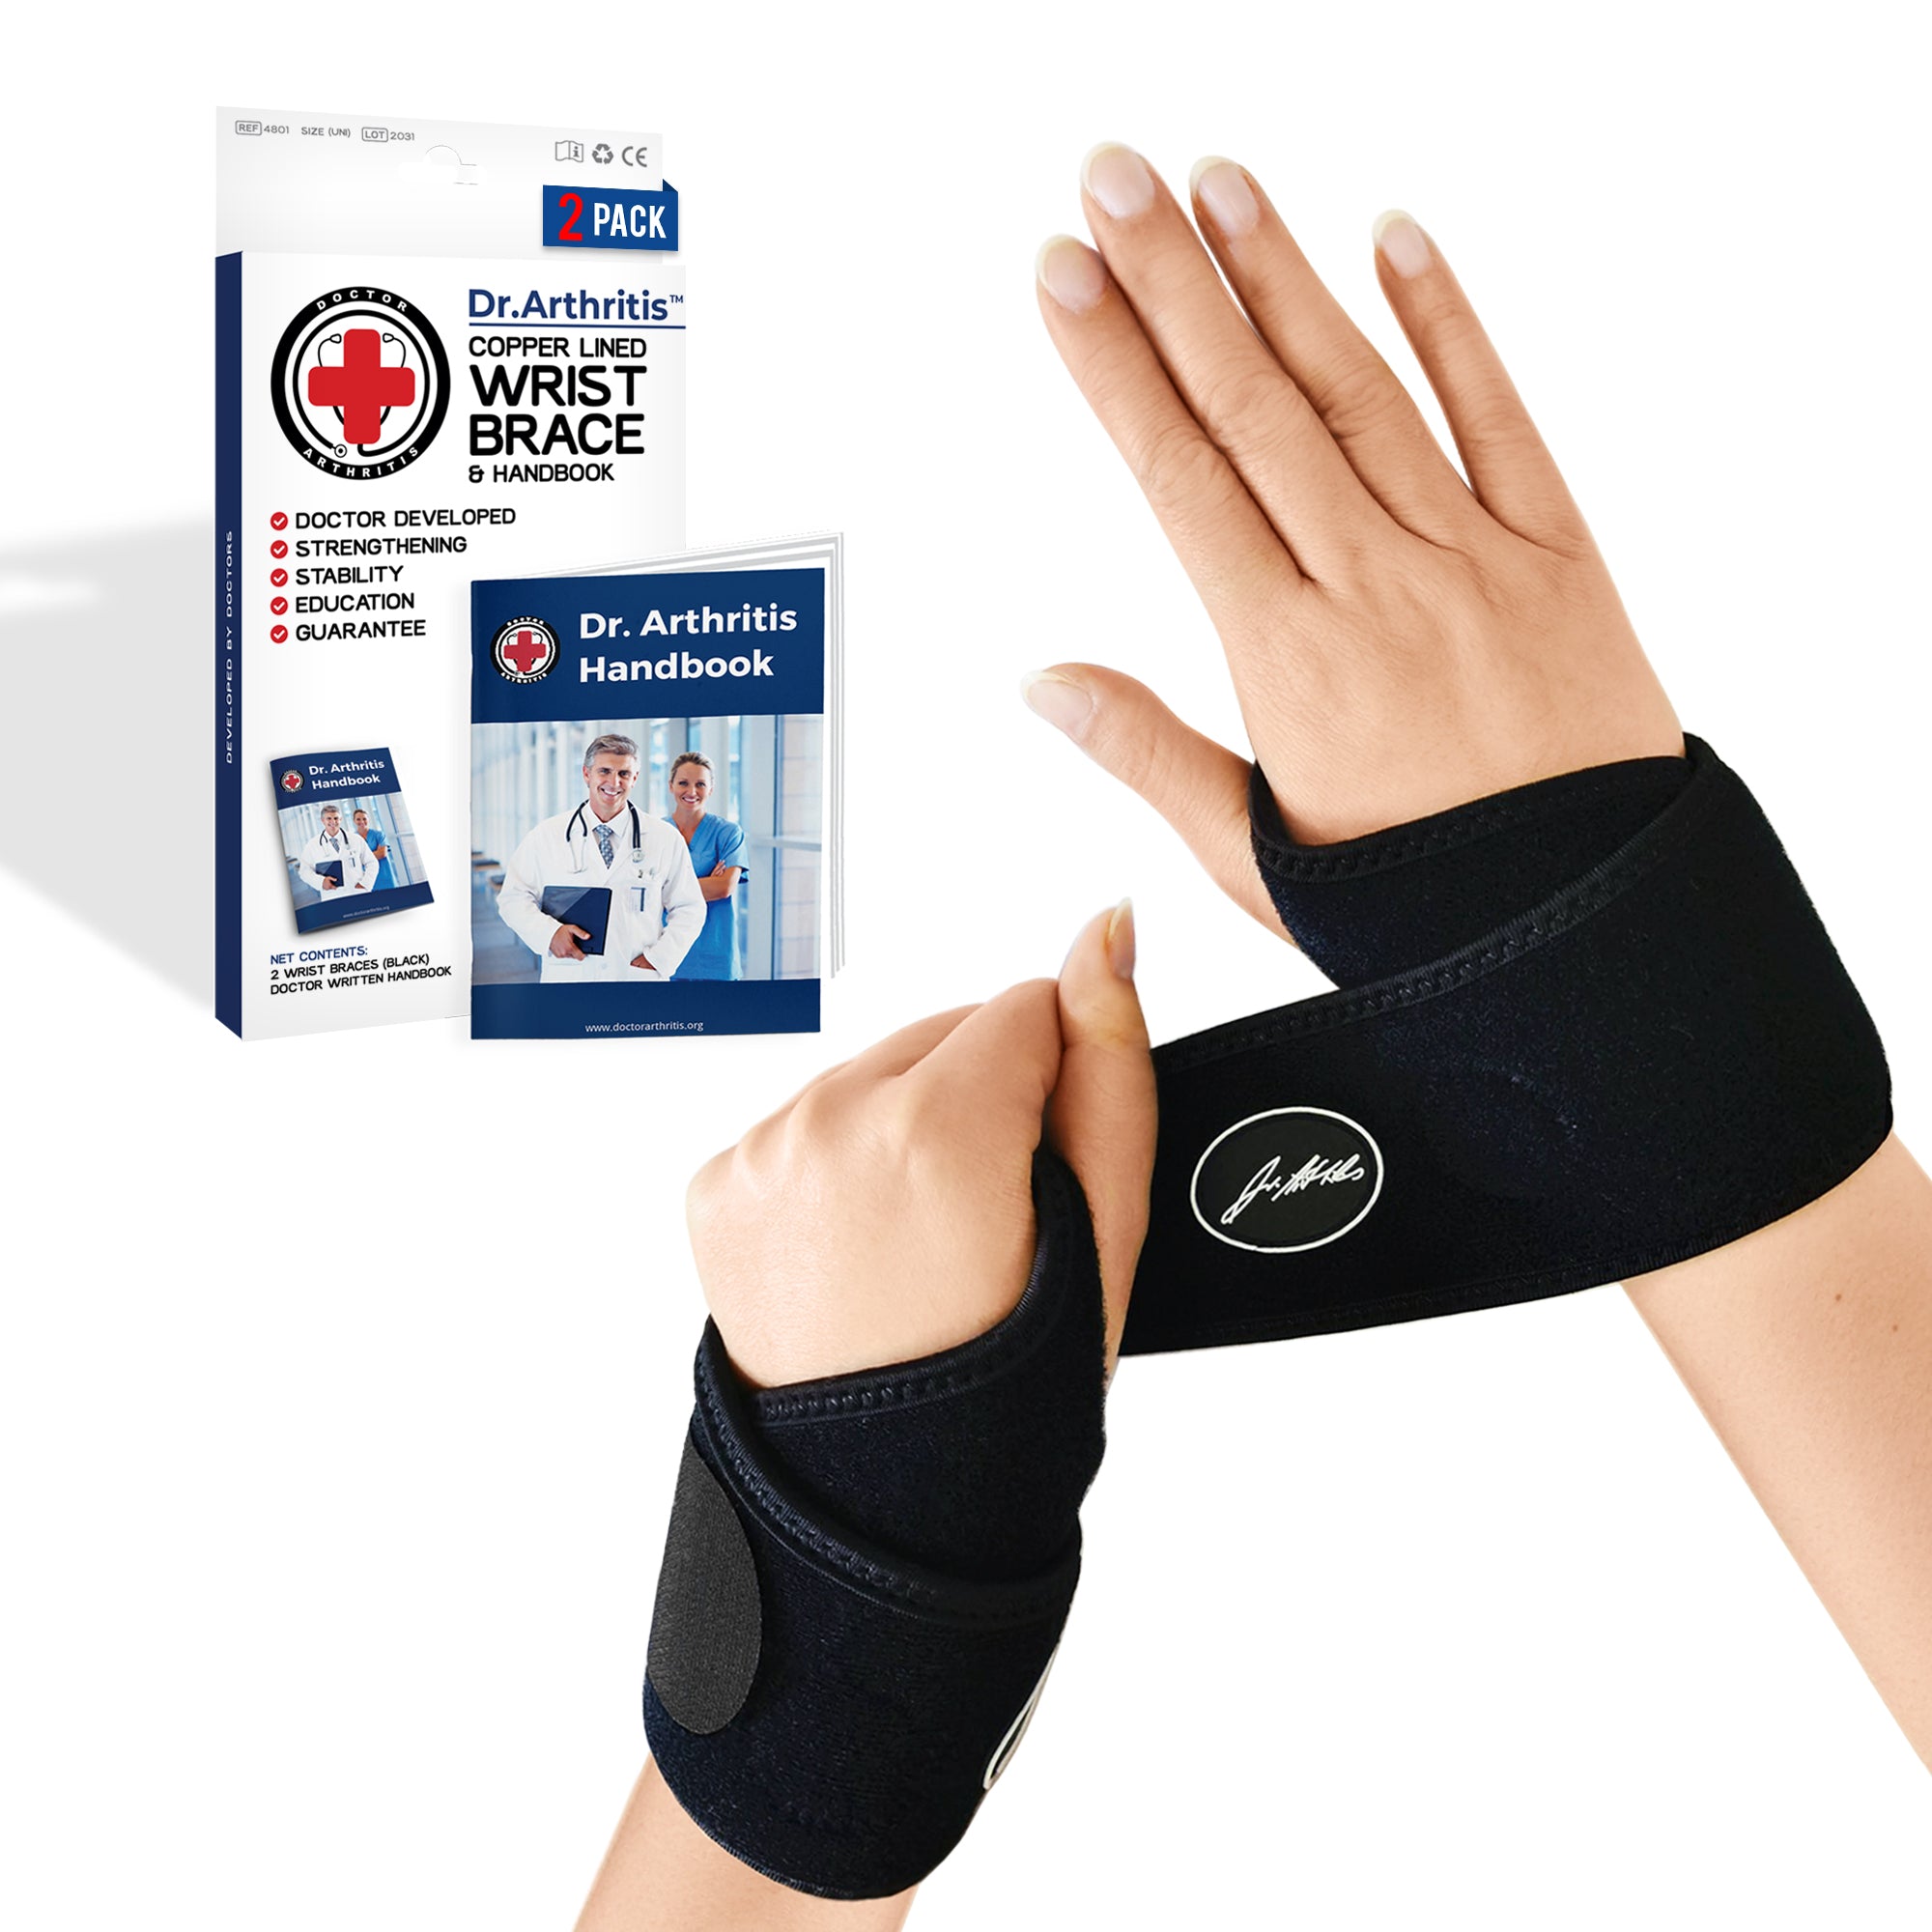 Copper Joe Carpal Tunnel Wrist Brace for Day and Night Support|Compression  Wrist Sleeve For Arthritis, Tendonitis, RSI and Sprain|Adjustable Wrist